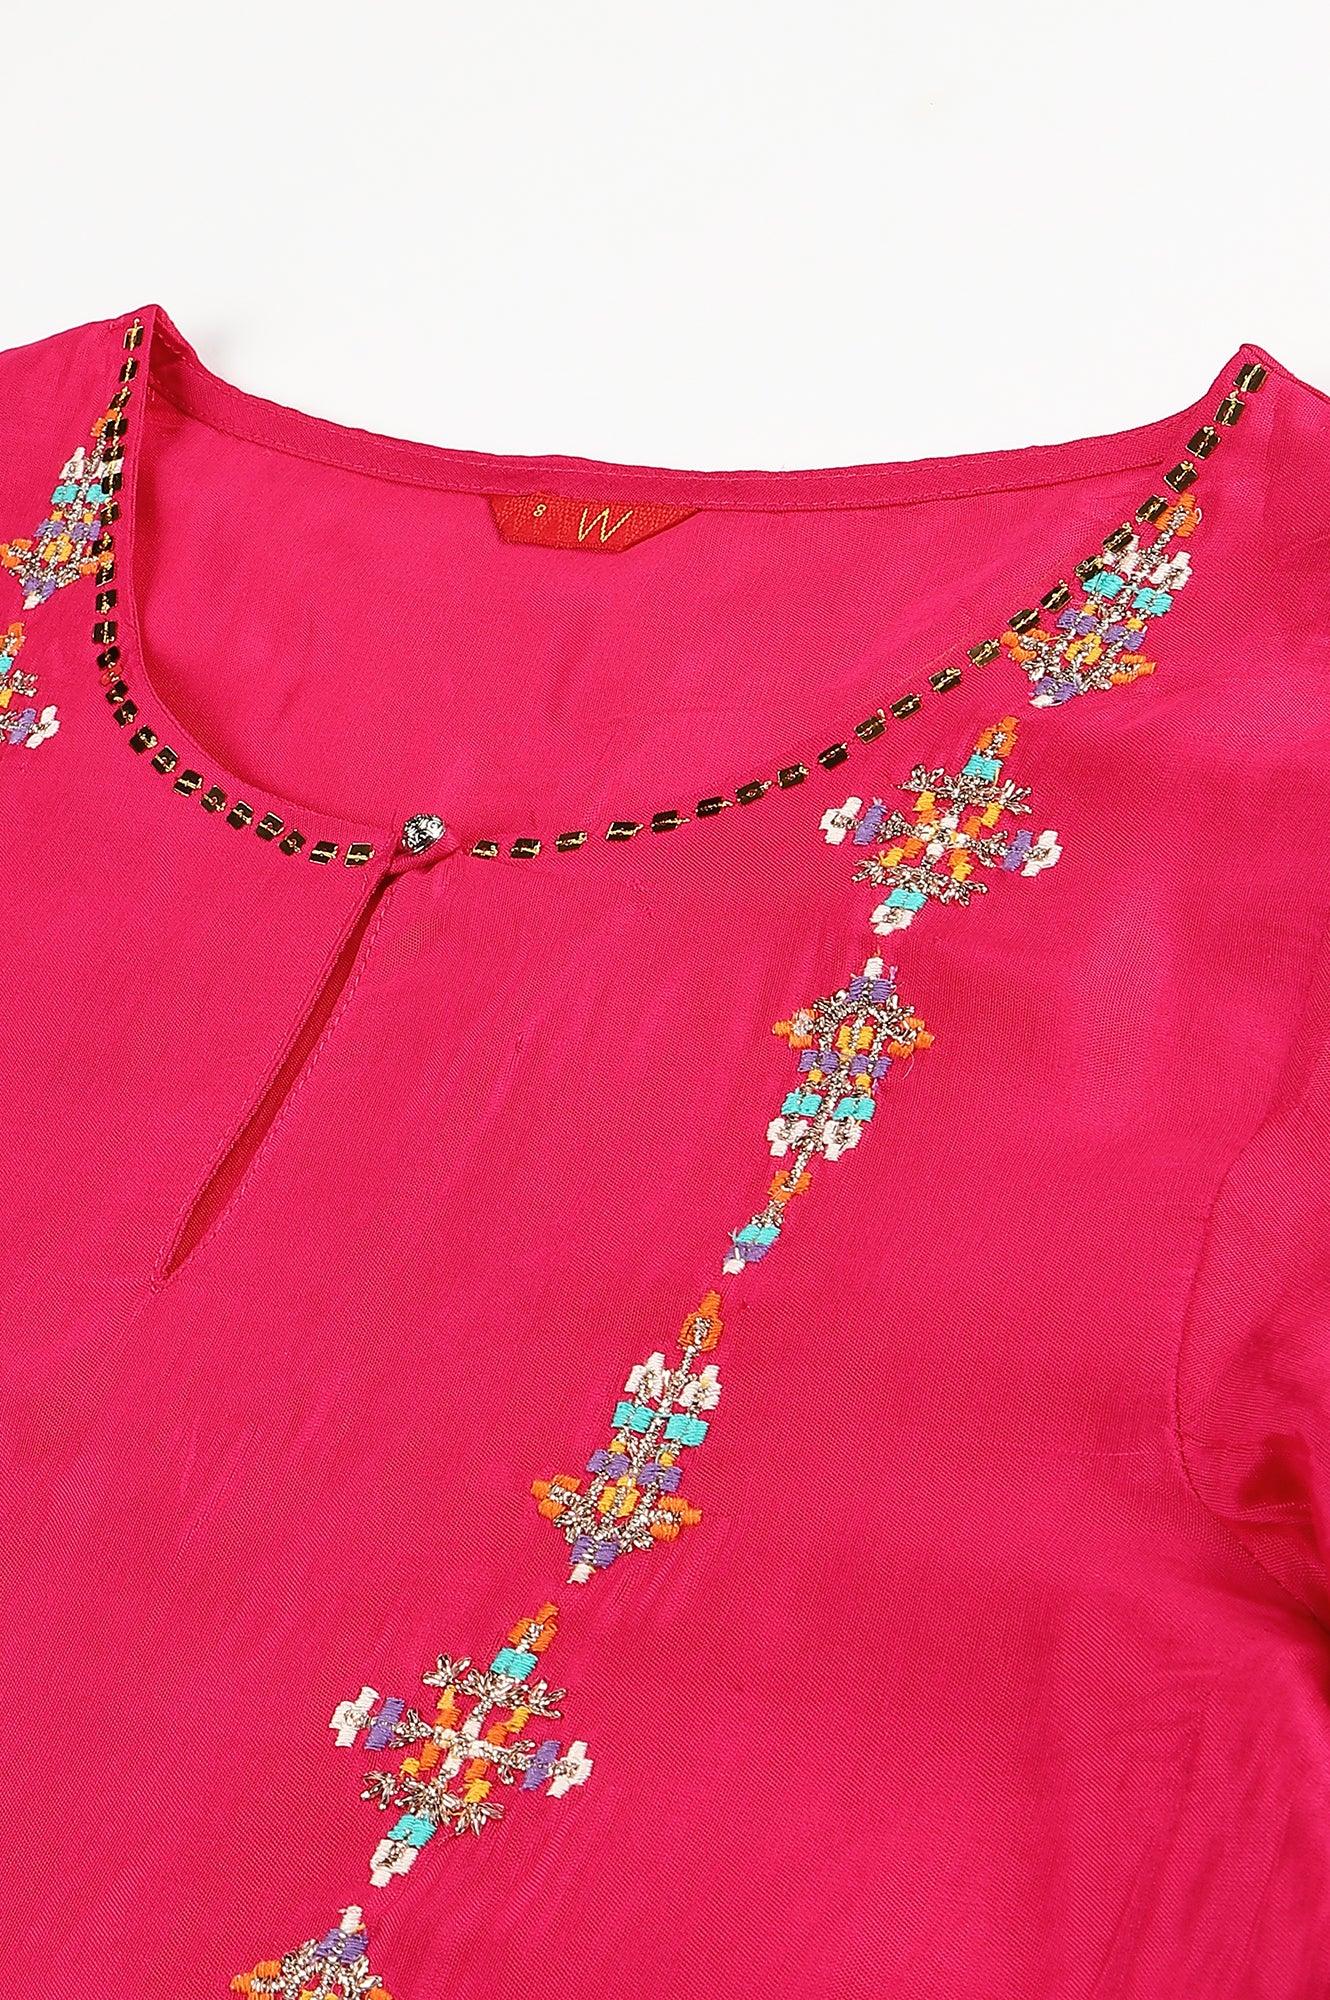 Bright Multicoloured Embroidered kurta With Front Slits - wforwoman